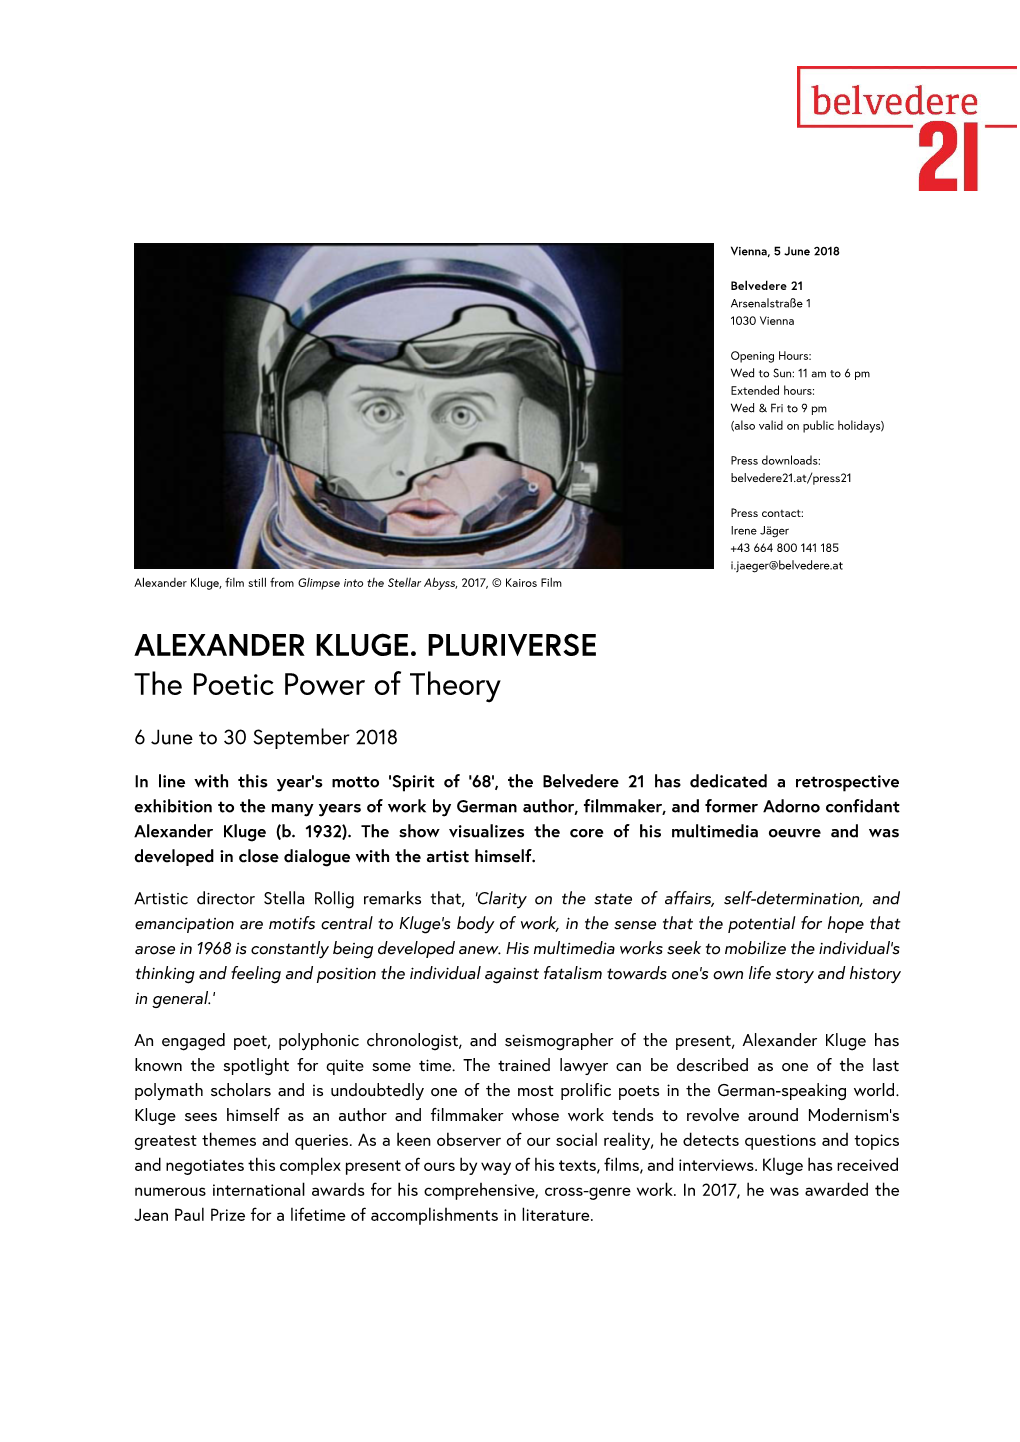 ALEXANDER KLUGE. PLURIVERSE the Poetic Power of Theory